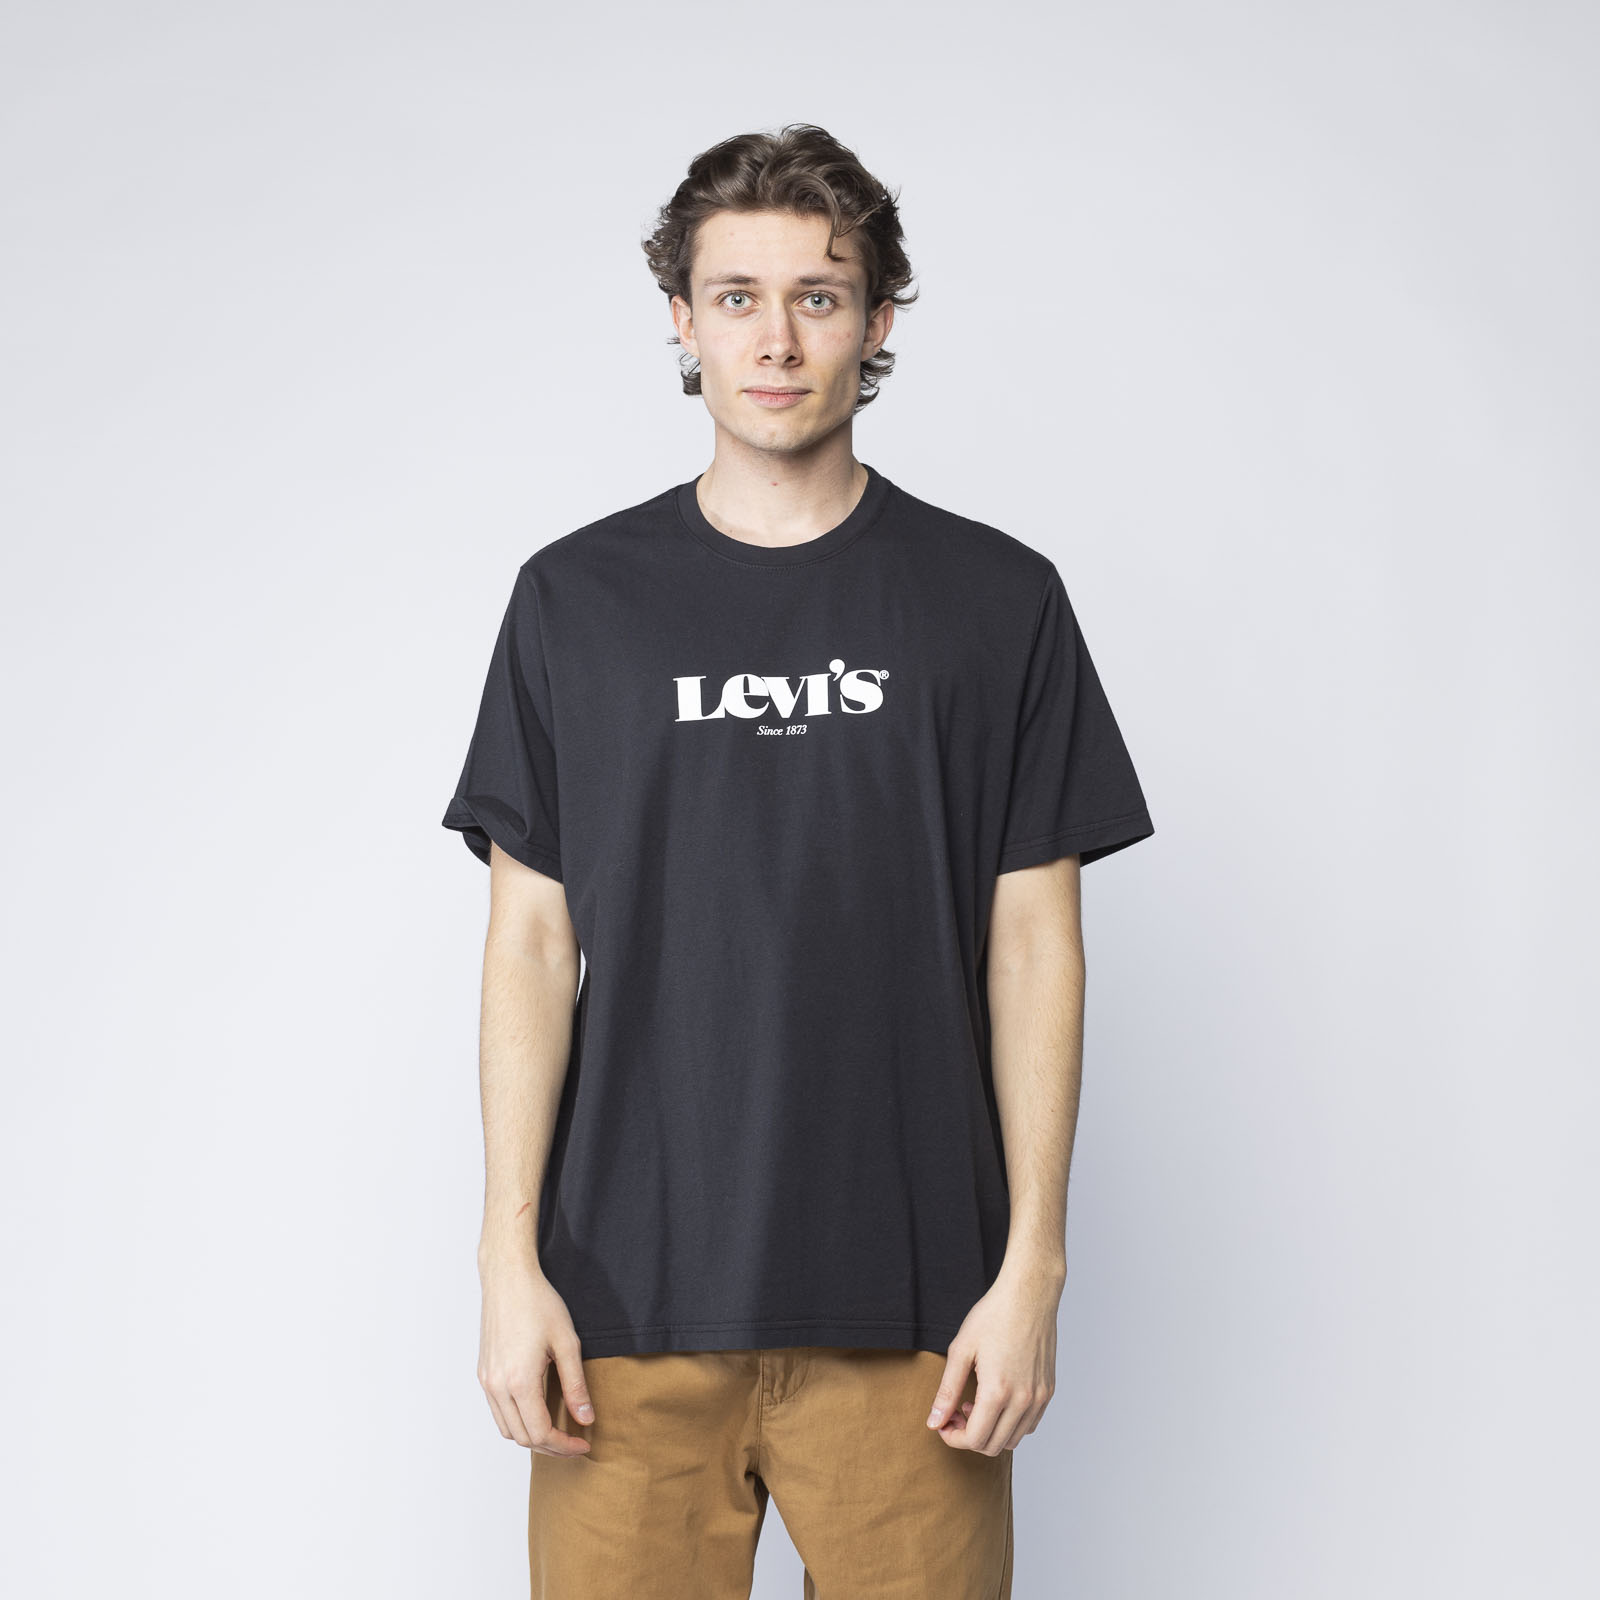 Levi's RELAXED FIT TEE BLACK | Men's \ Men's clothing \ T-shirts Brands \  #Marki - 3 \ Levi's